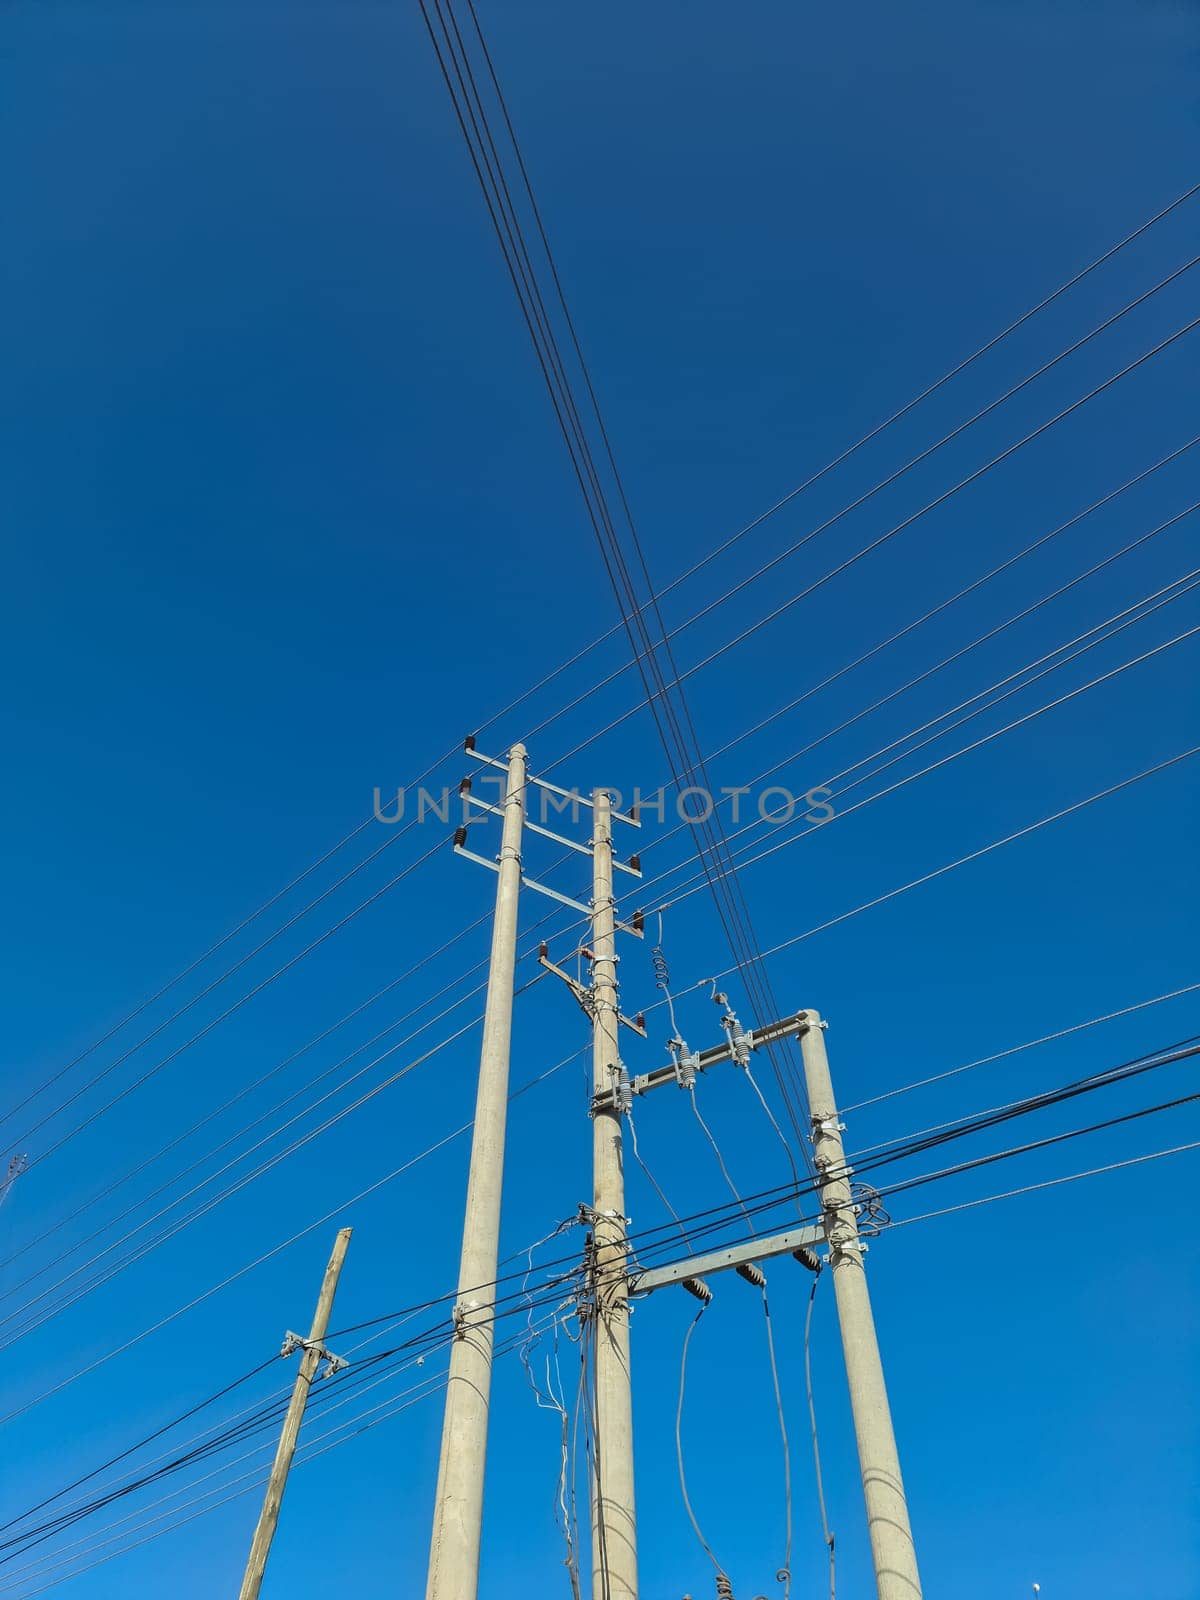 Wildly attached power cables to a power pole